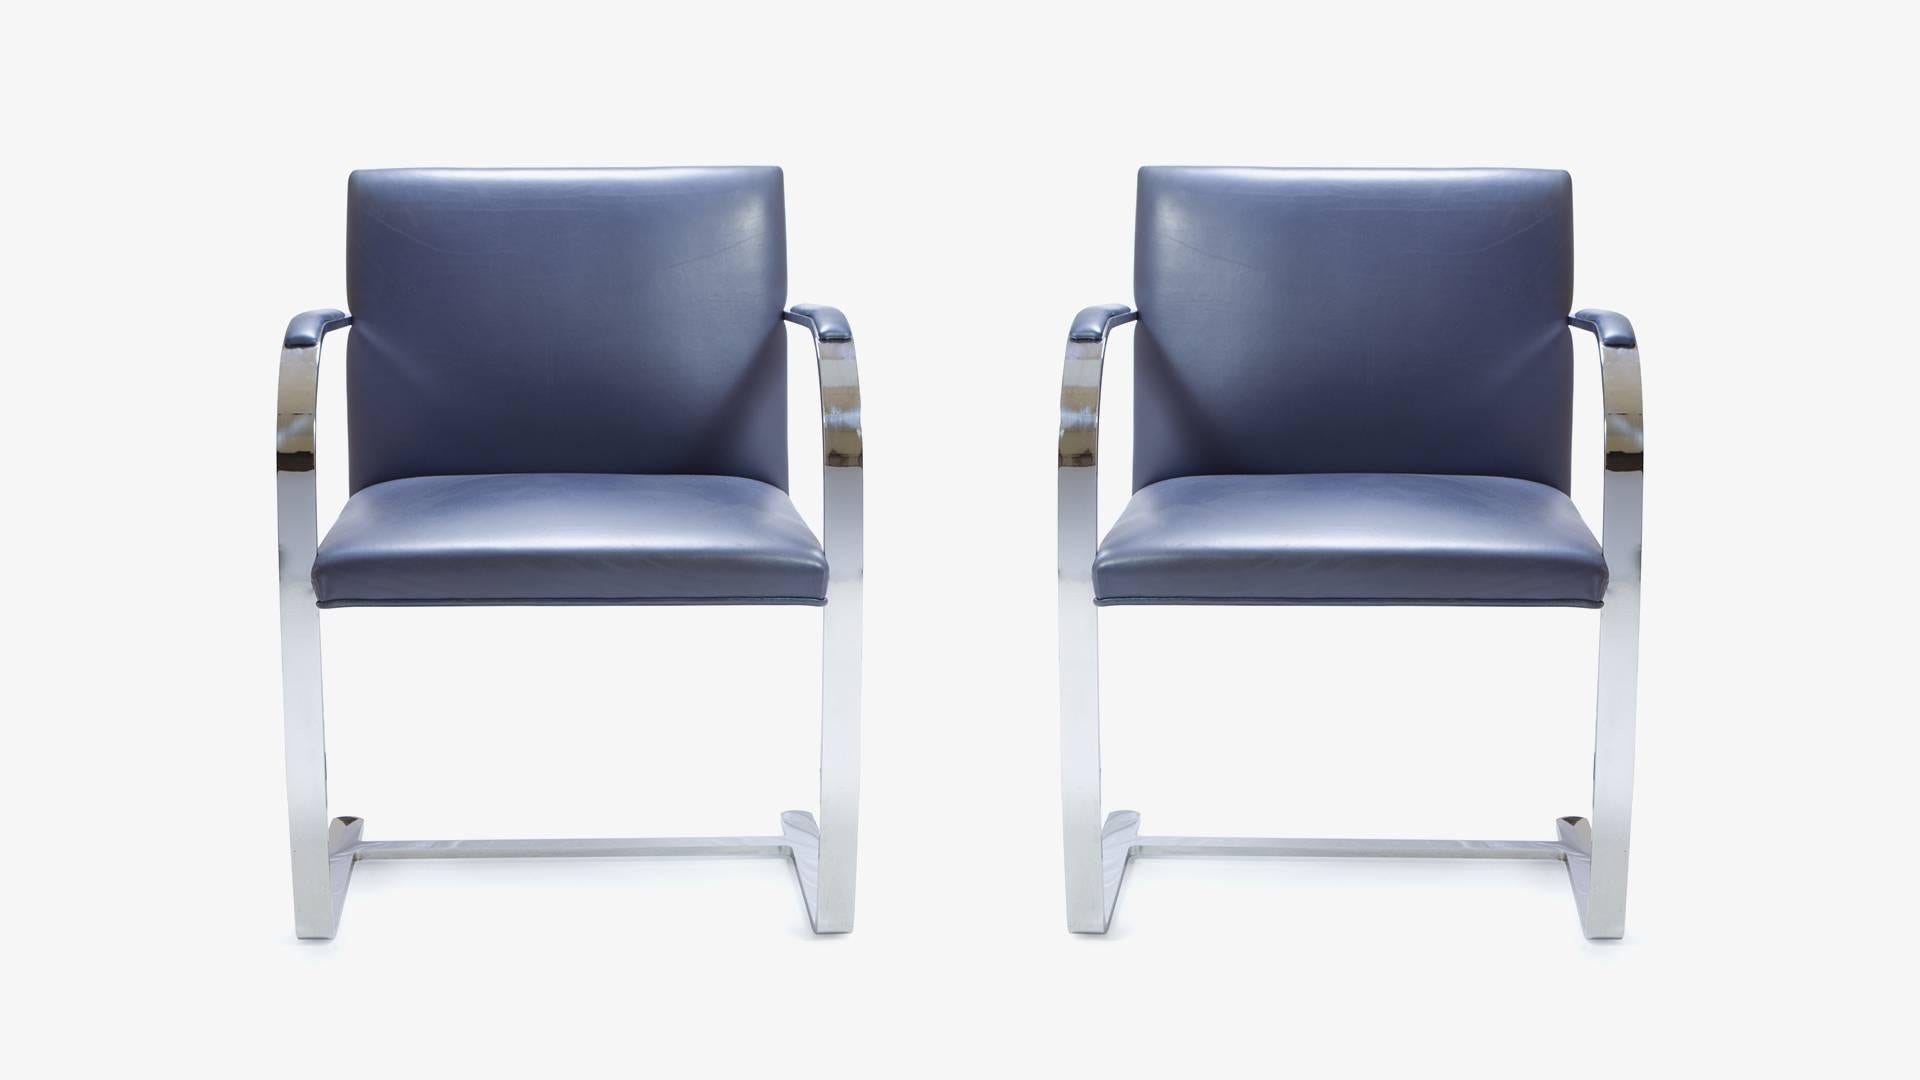 The definition of minimalism in a singular design, achieved by the great Ludwig Mies van der Rohe in 1929; the brno flat-bar chair is just that. These are contemporary edition Mies van der Rohe for Knoll chairs upholstered in a supple Navy Blue